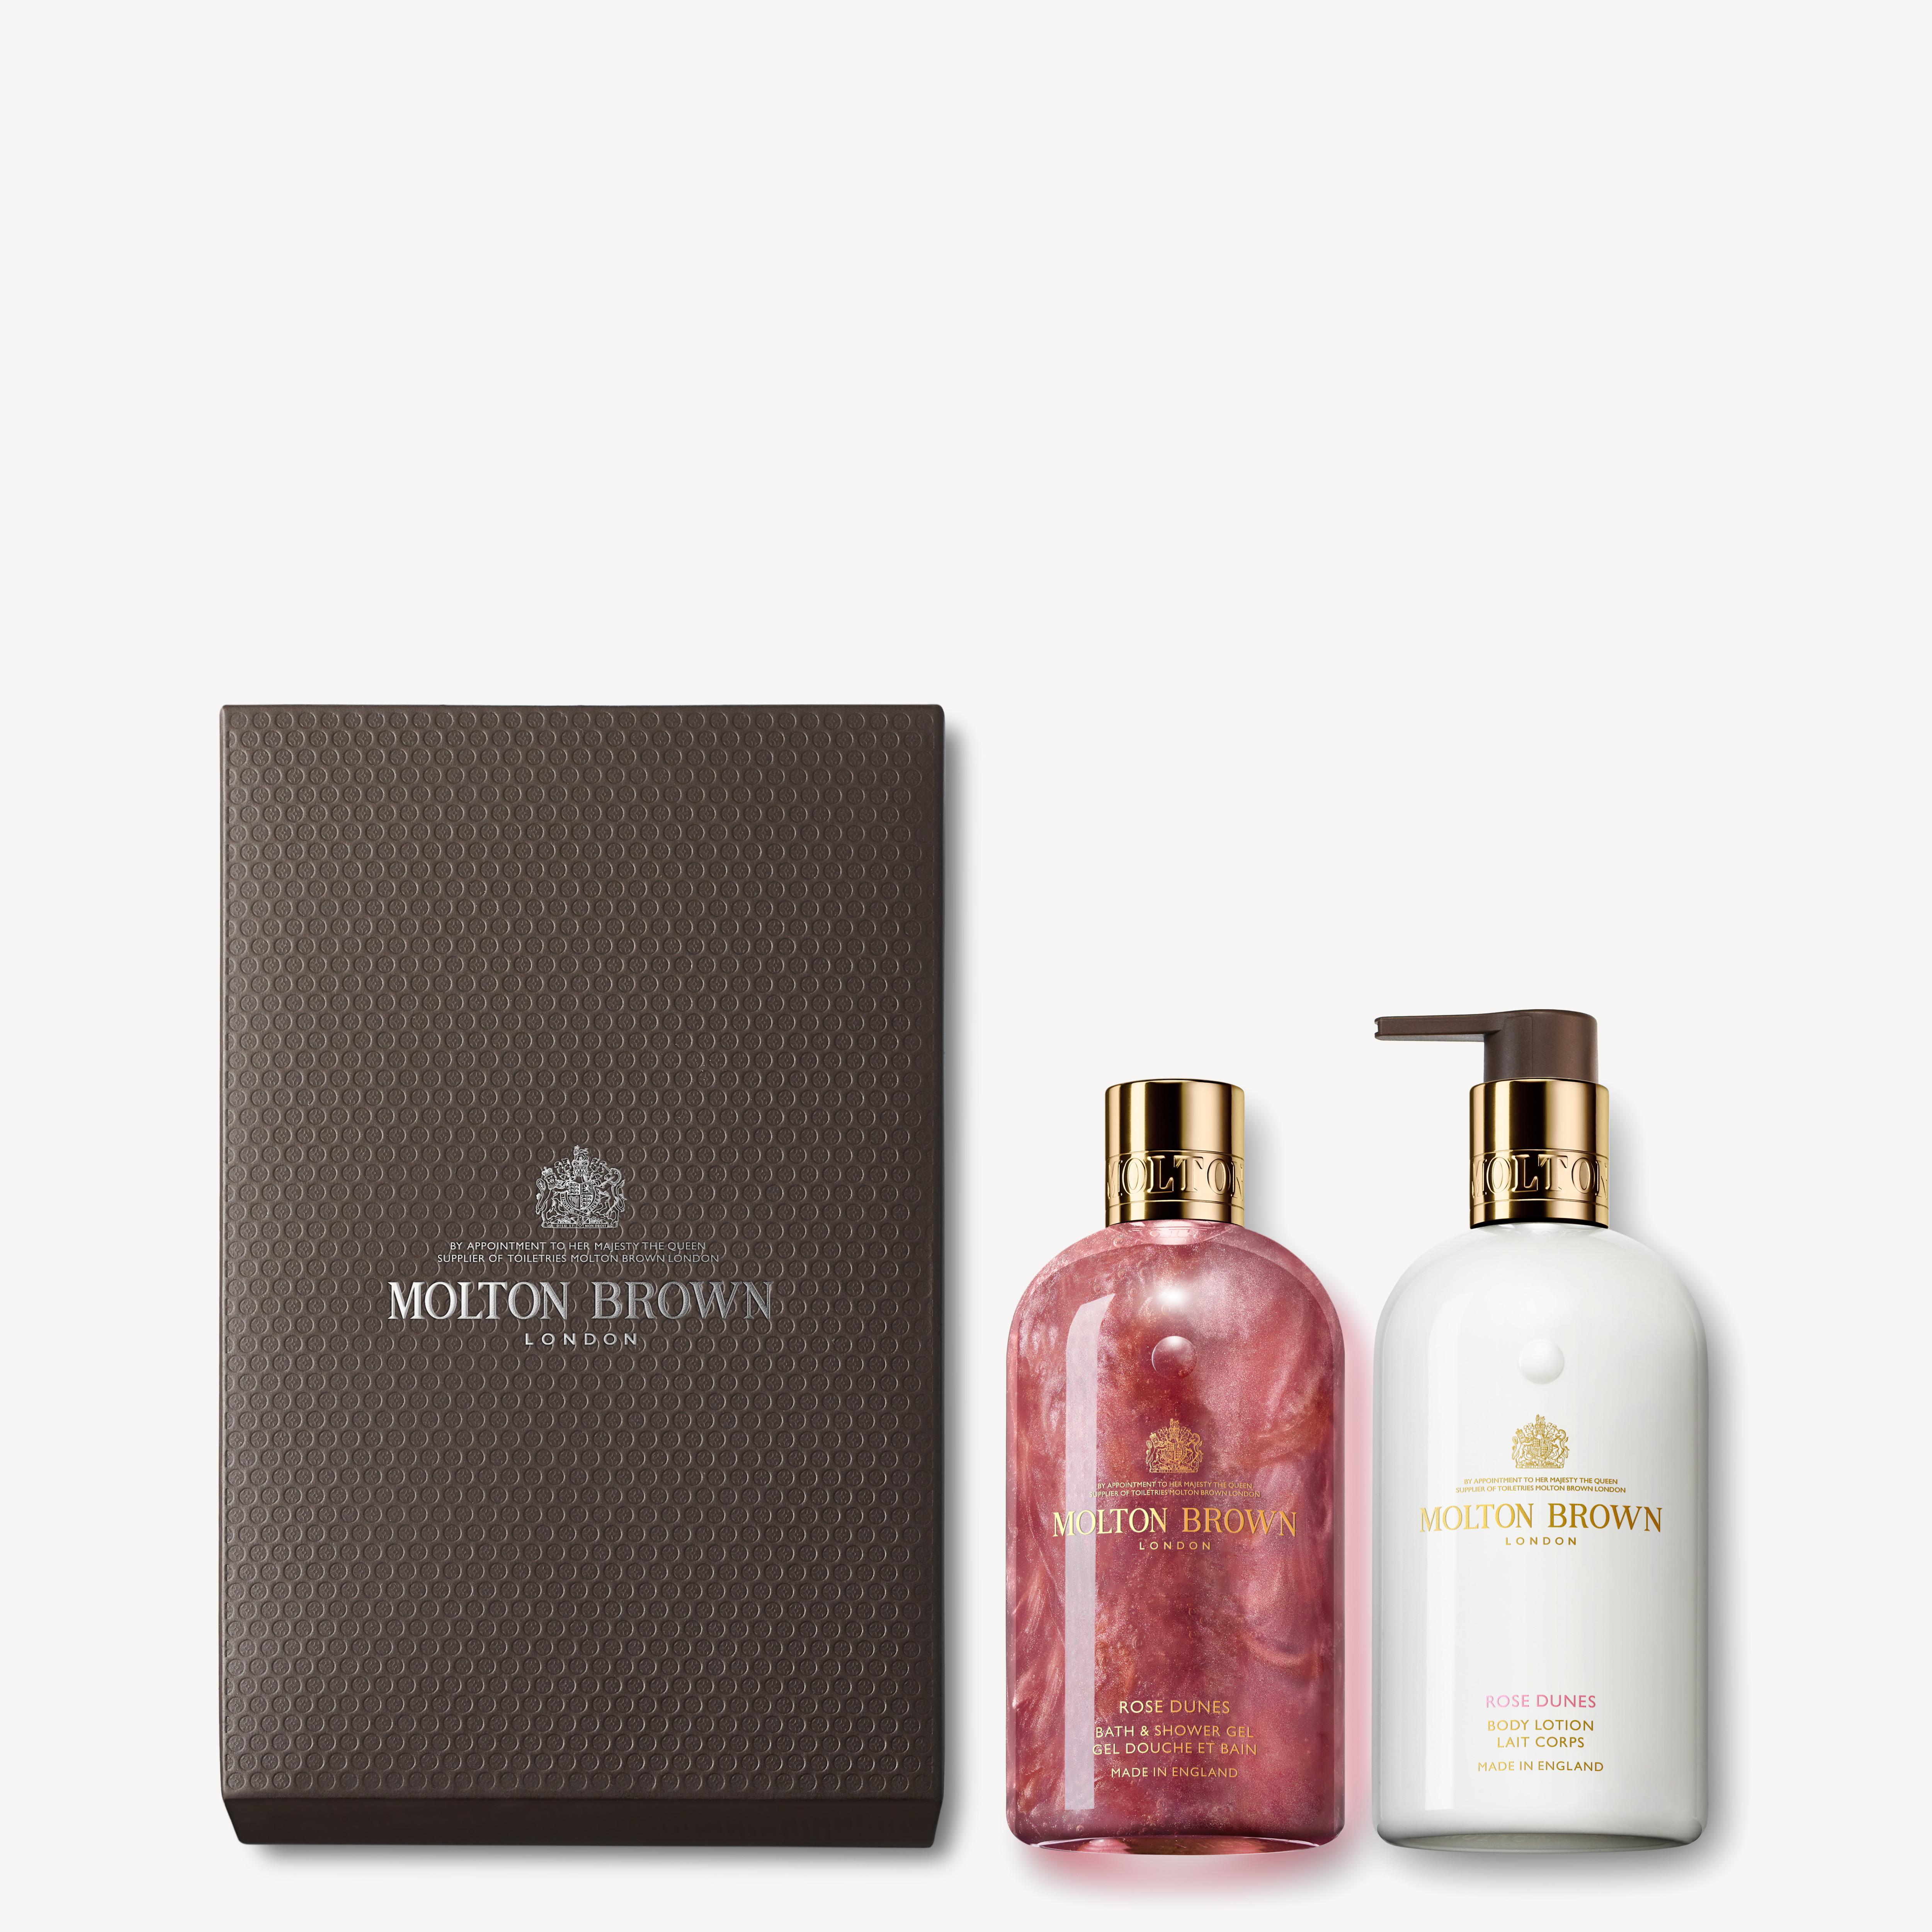 Molton Brown Rose Dunes Body Care Gift Set